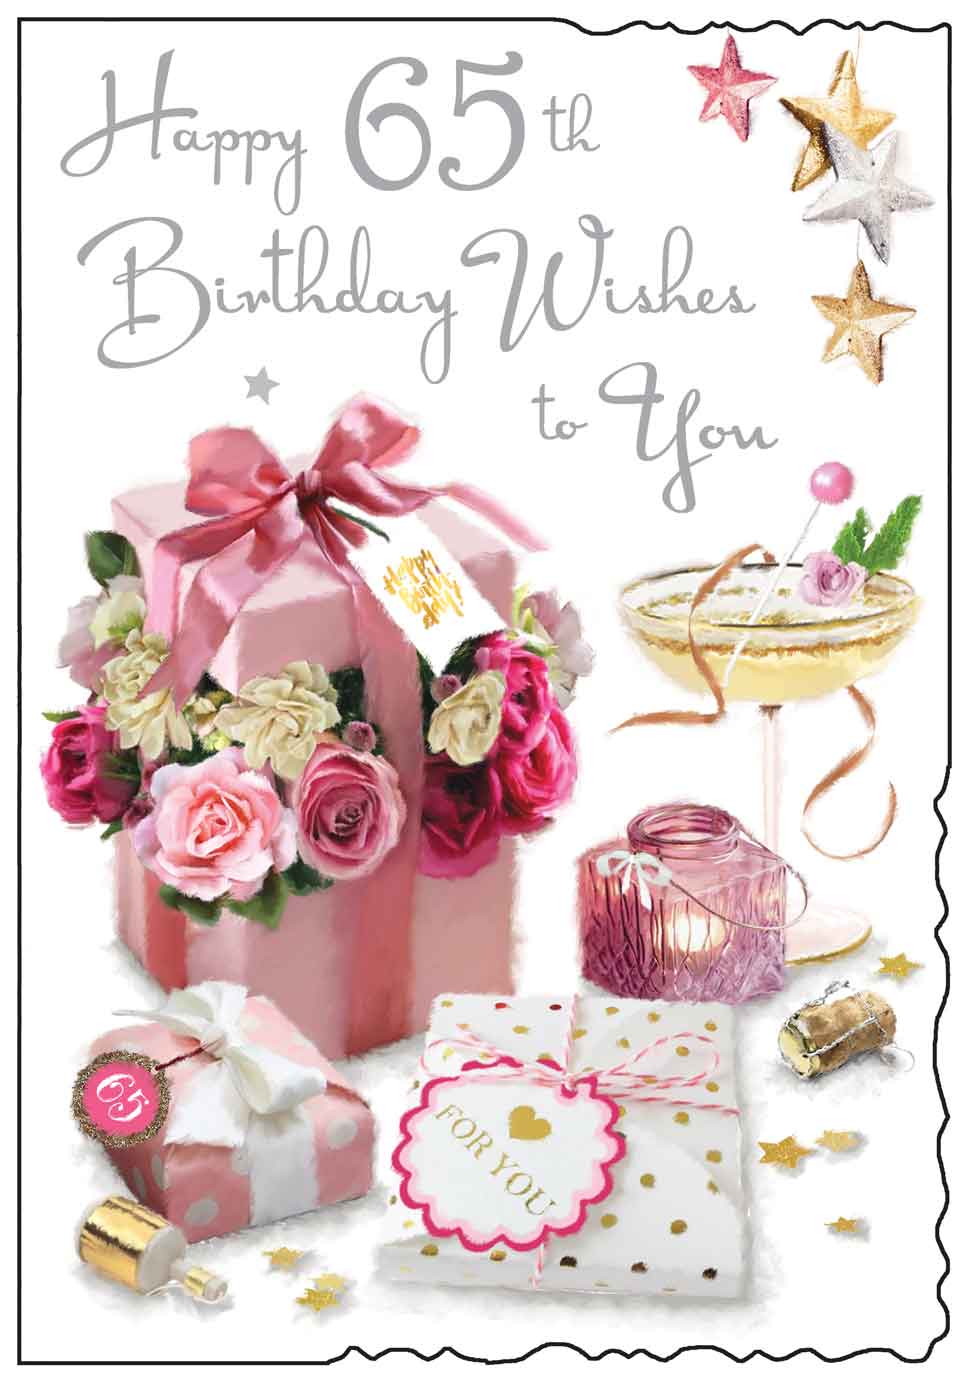 65th Birthday Card - Posh Roses Champagne And Quality Gifts